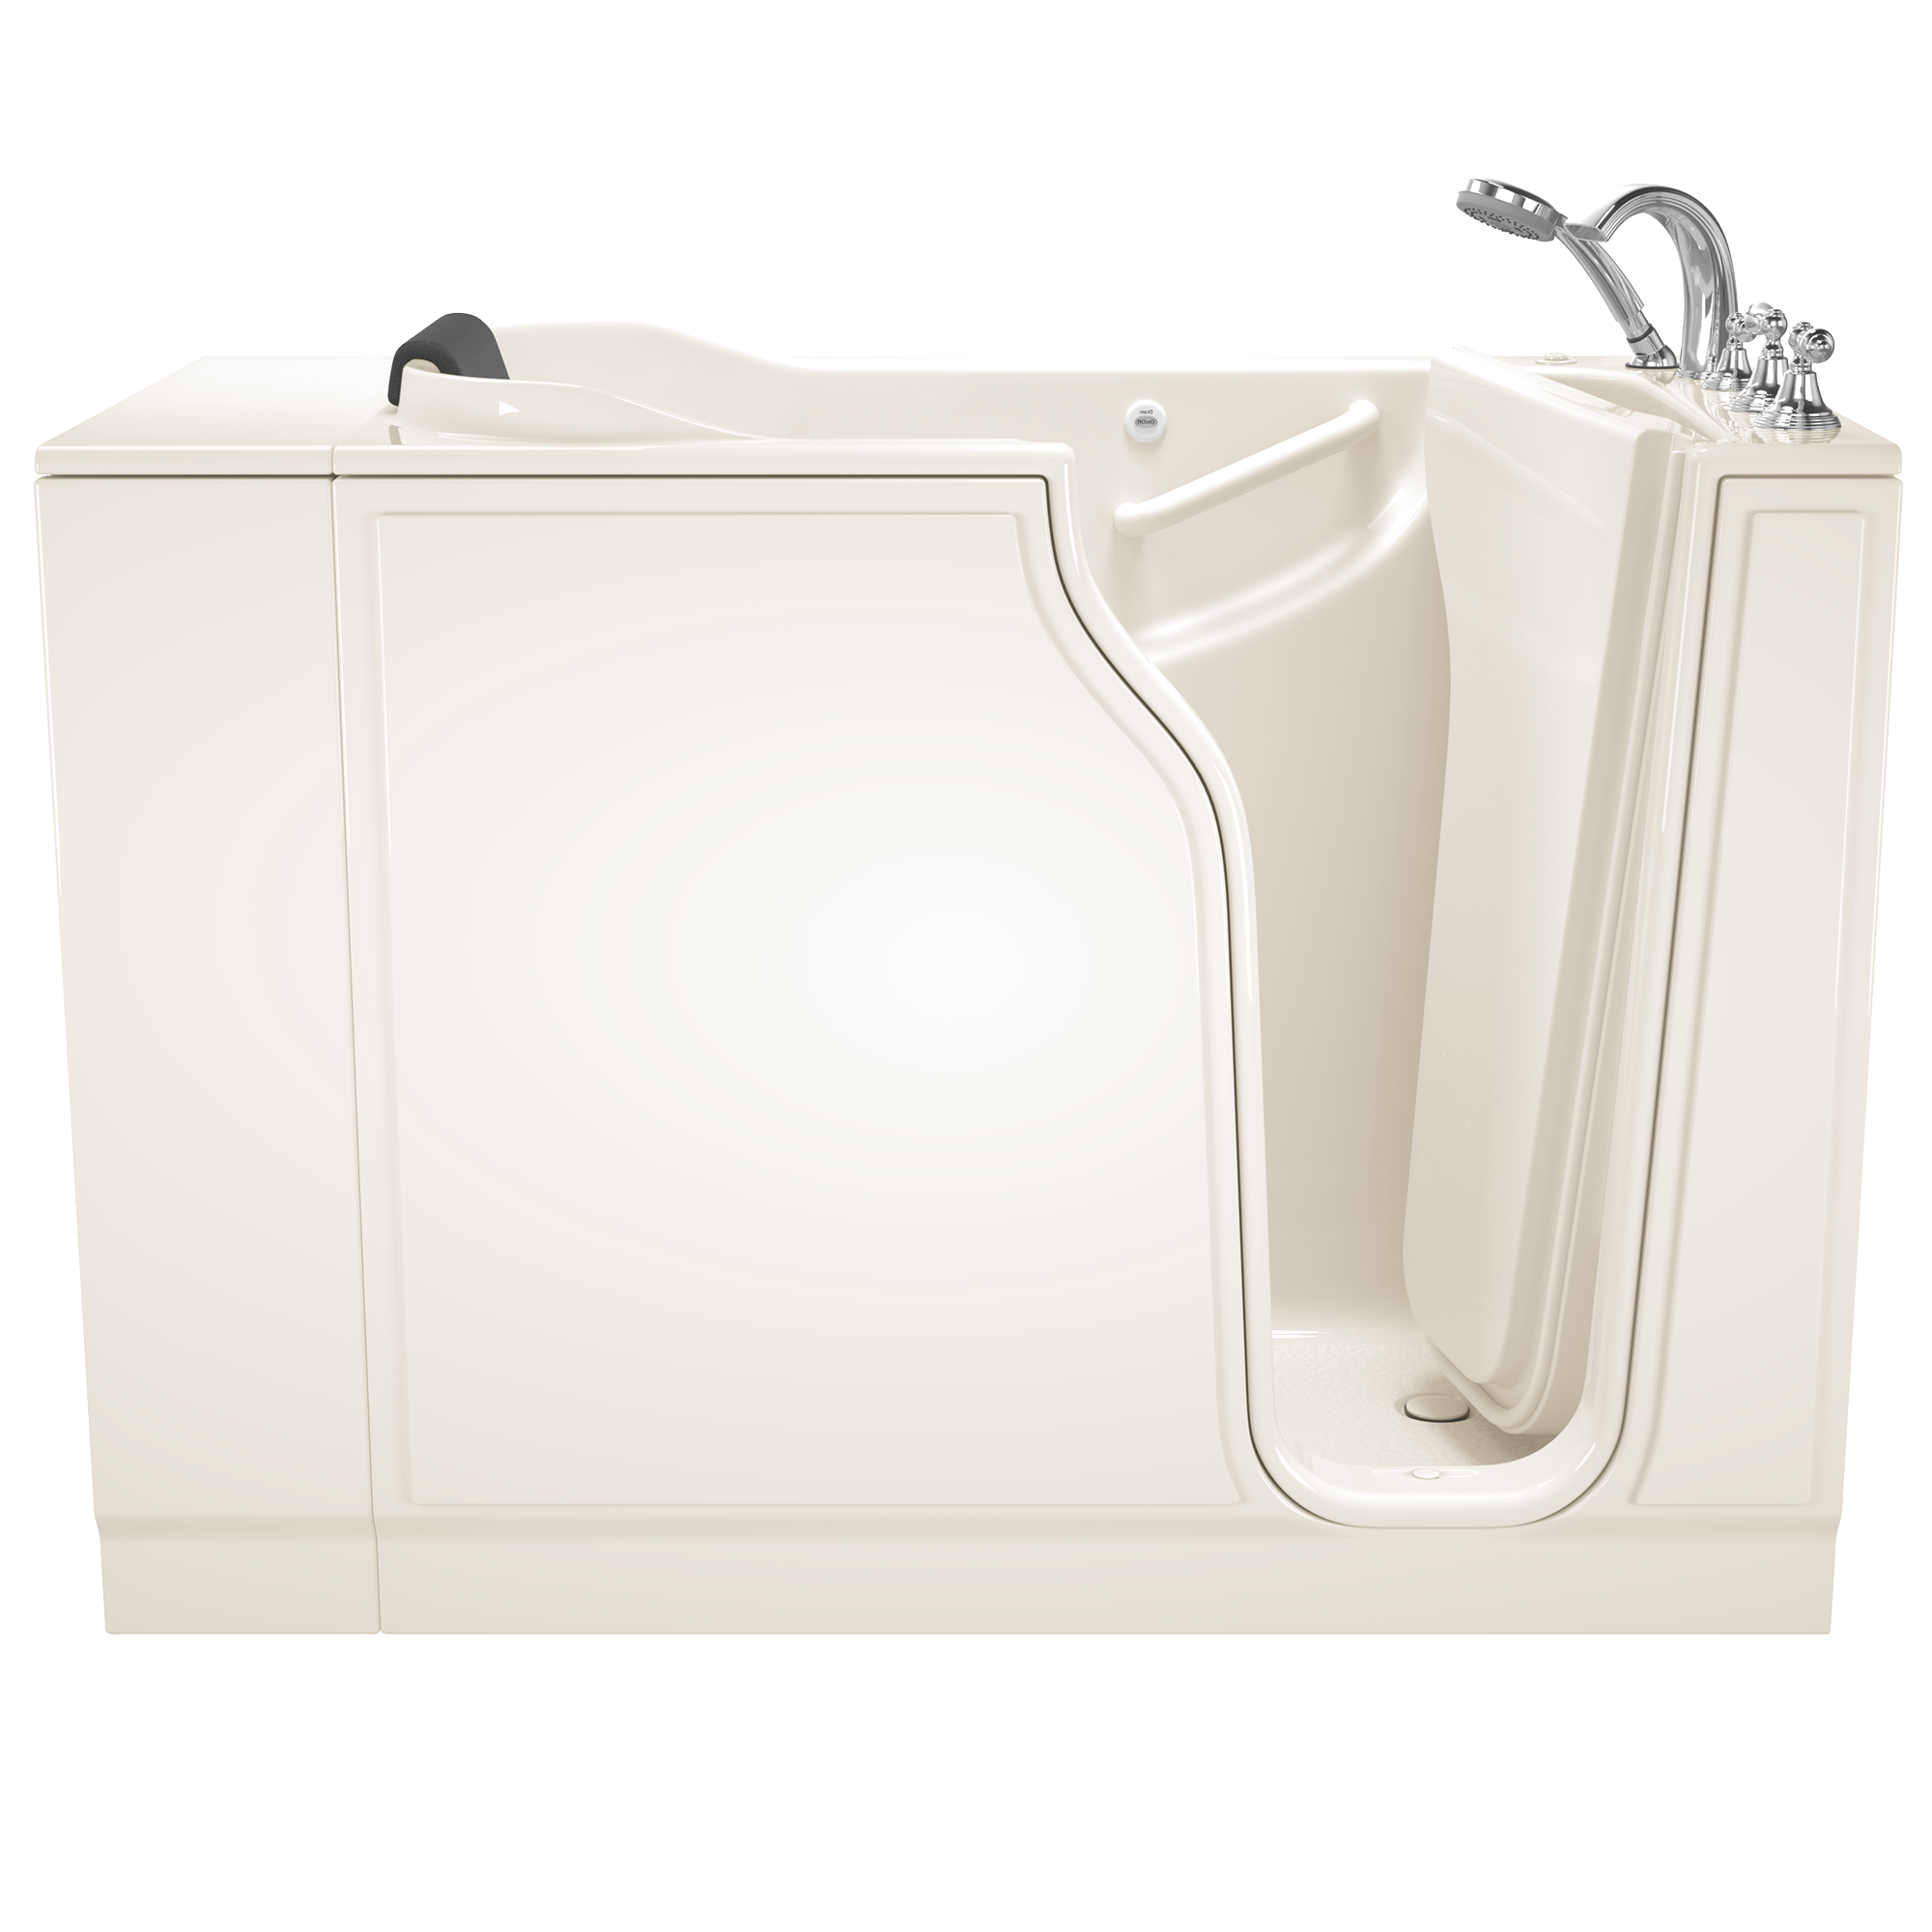 Gelcoat Premium Series 30 x 52  Inch Walk in Tub With Whirlpool System   Right Hand Drain With Faucet WIB LINEN